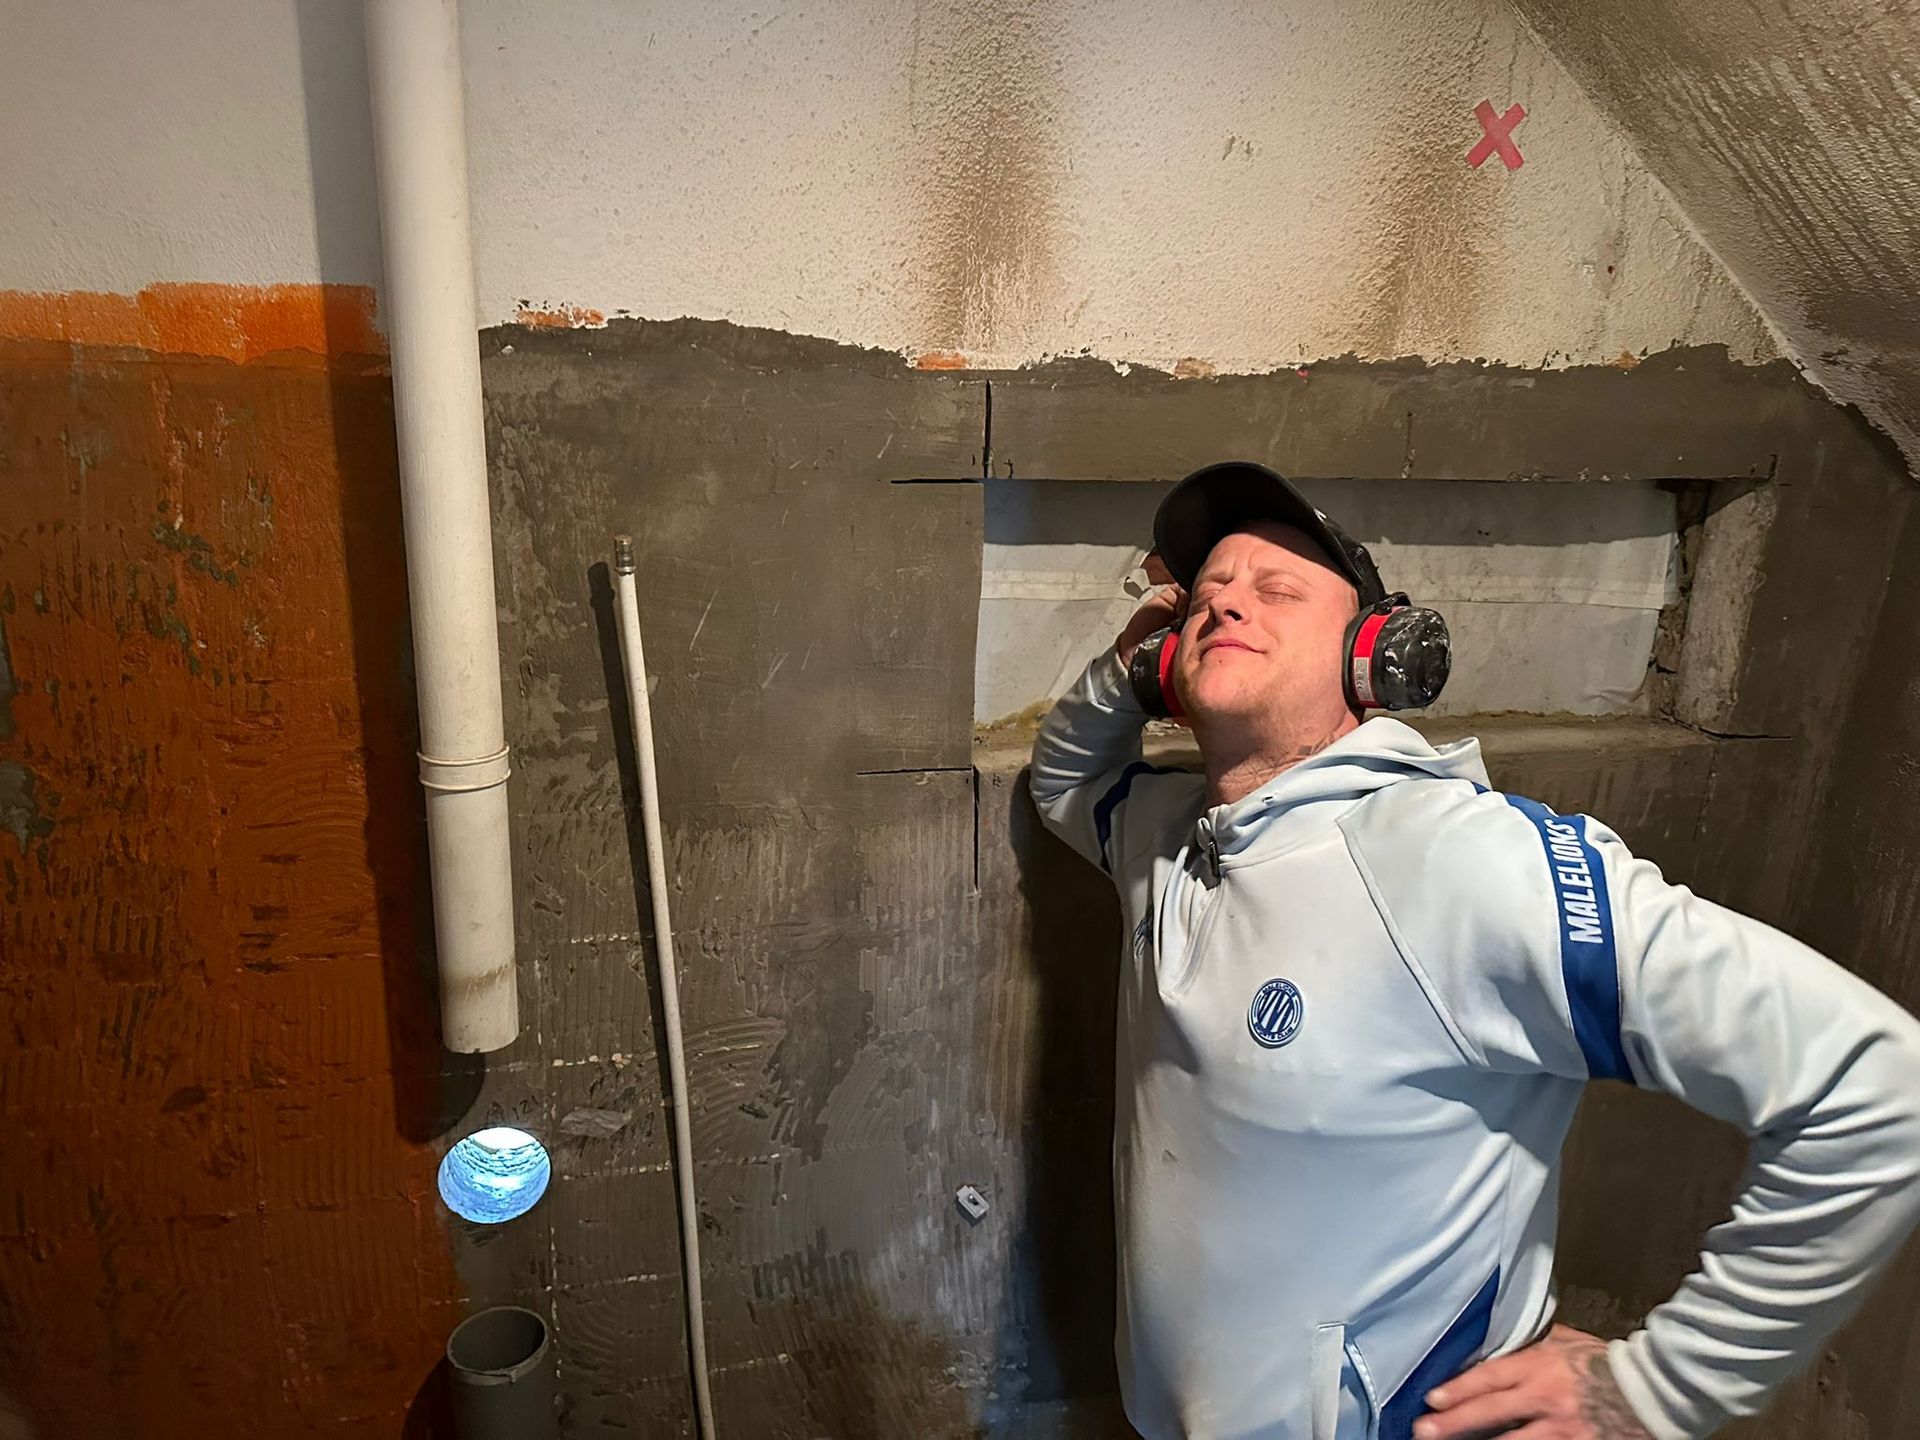 A man wearing headphones is leaning against a concrete wall with a hole in it